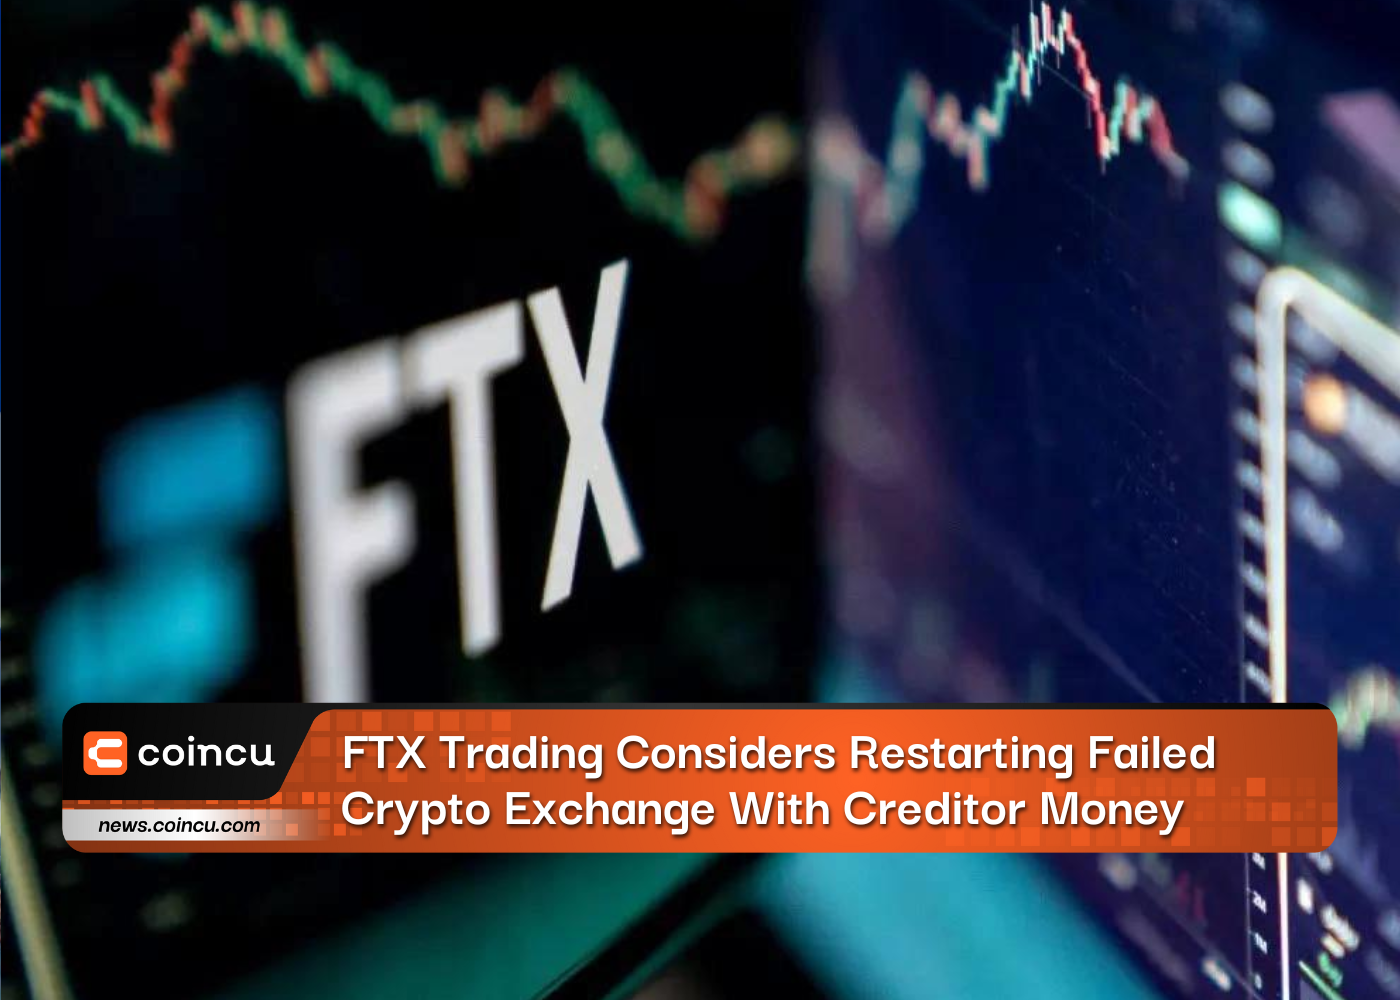 FTX Trading Considers Restarting Failed Crypto Exchange With Creditor Money